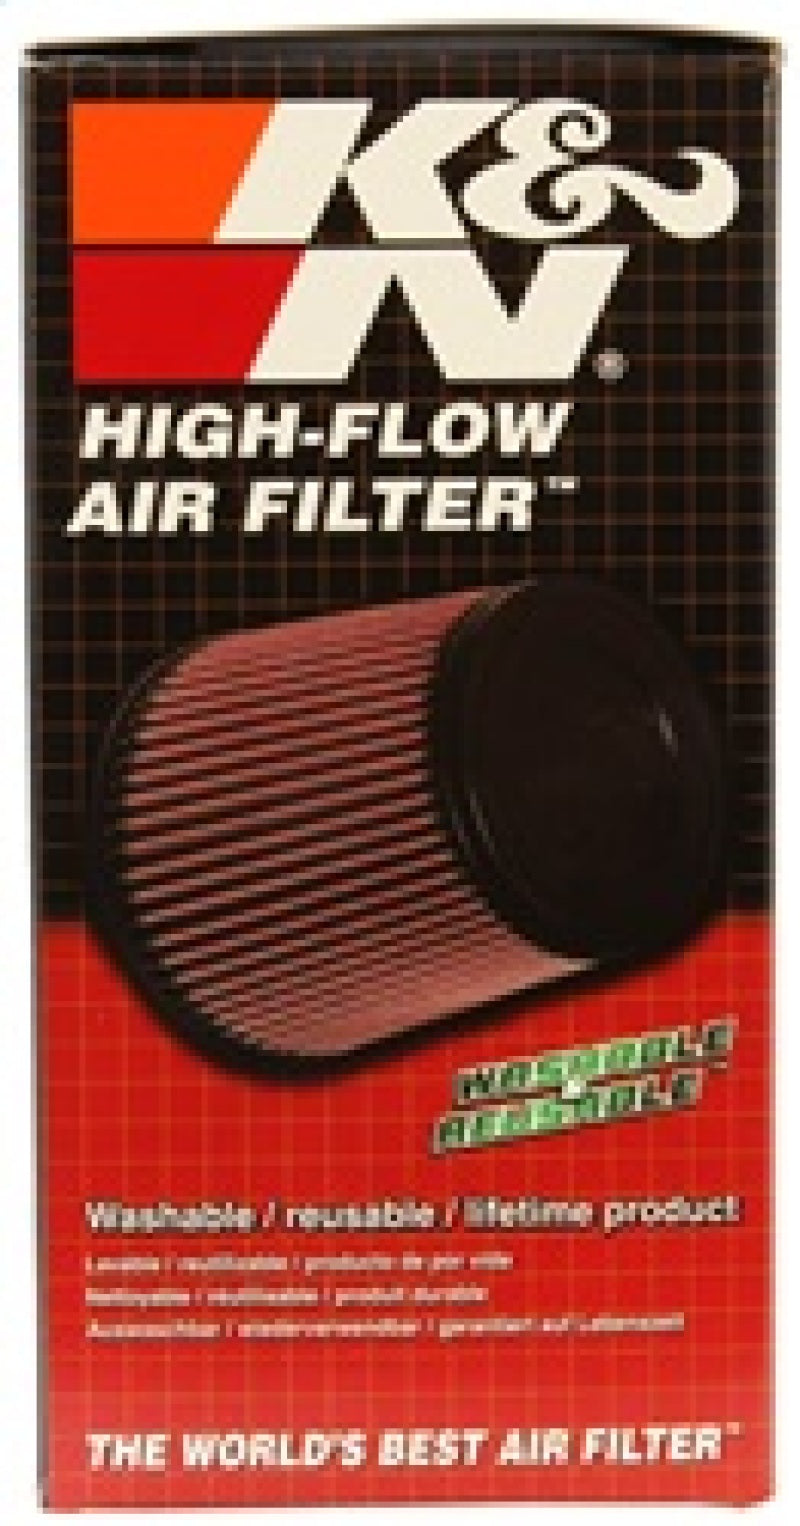 K&N Filter Universal  Filter 2 3/8 inch Dual Flange 107mm C-C 3 inch Height -  Shop now at Performance Car Parts